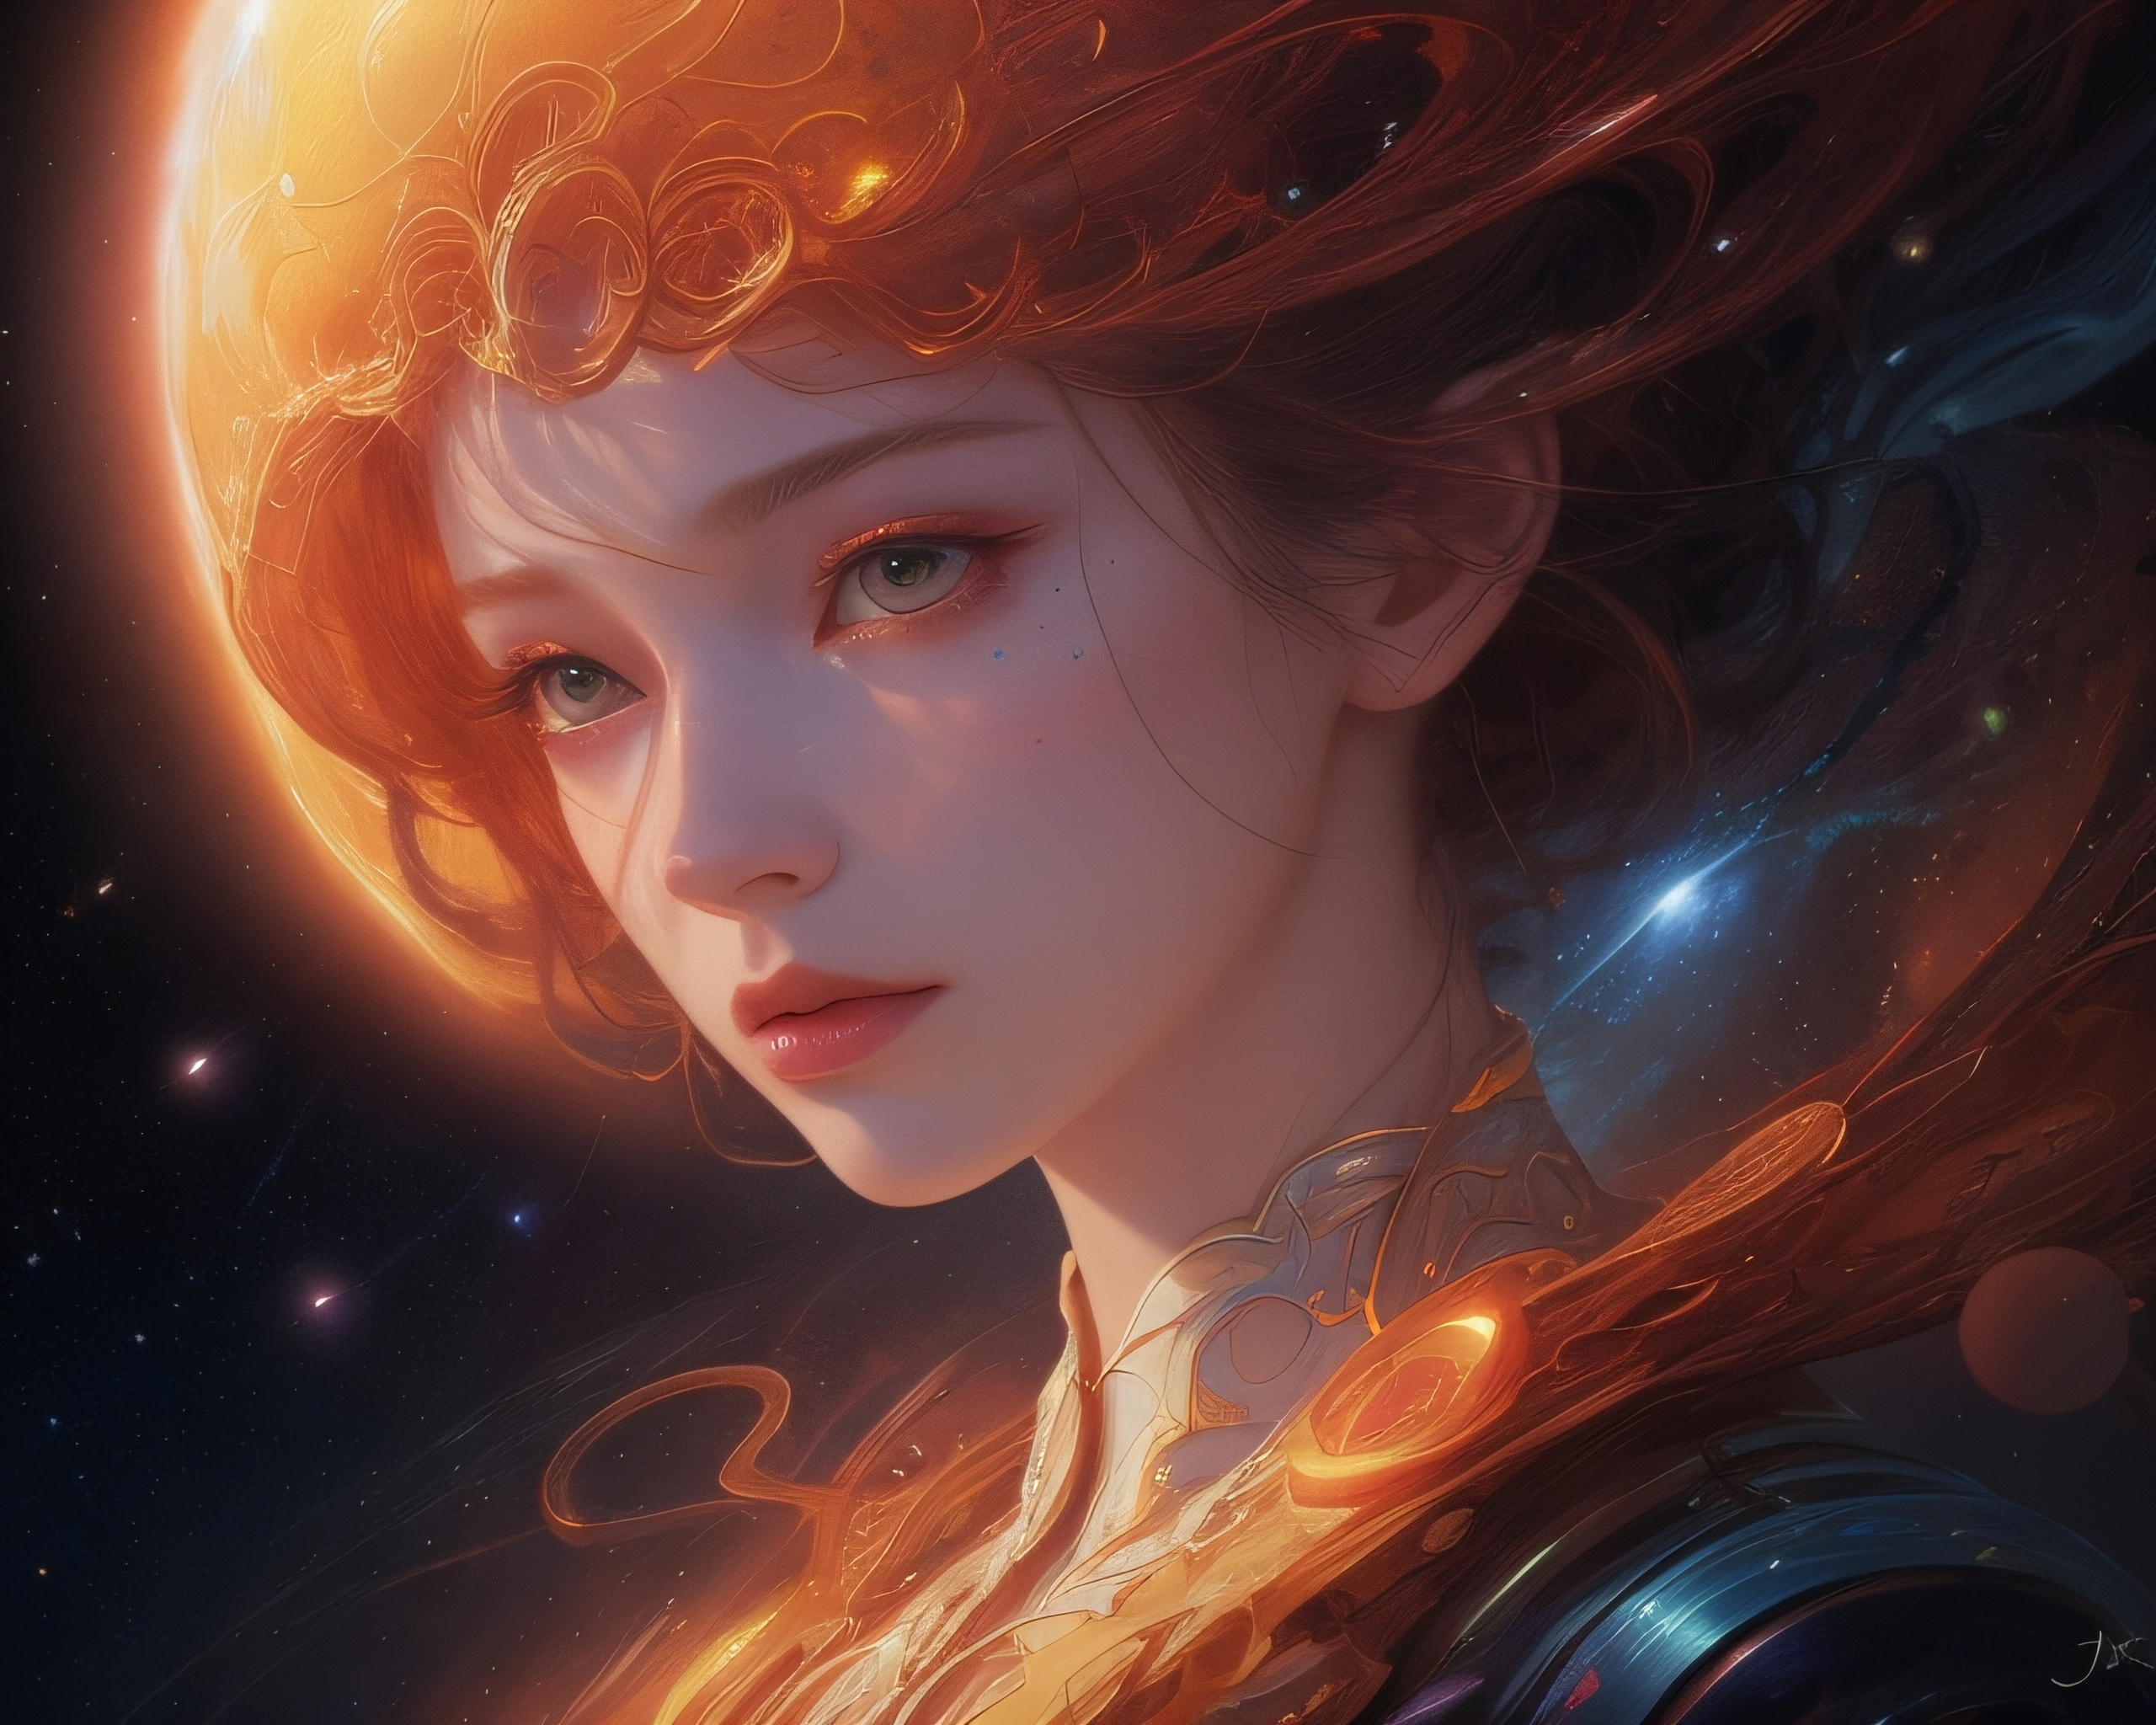 Surreal anime-inspired cinematic HD wallpaper featuring a realistic and artistic depiction of space with a lyrical touch.